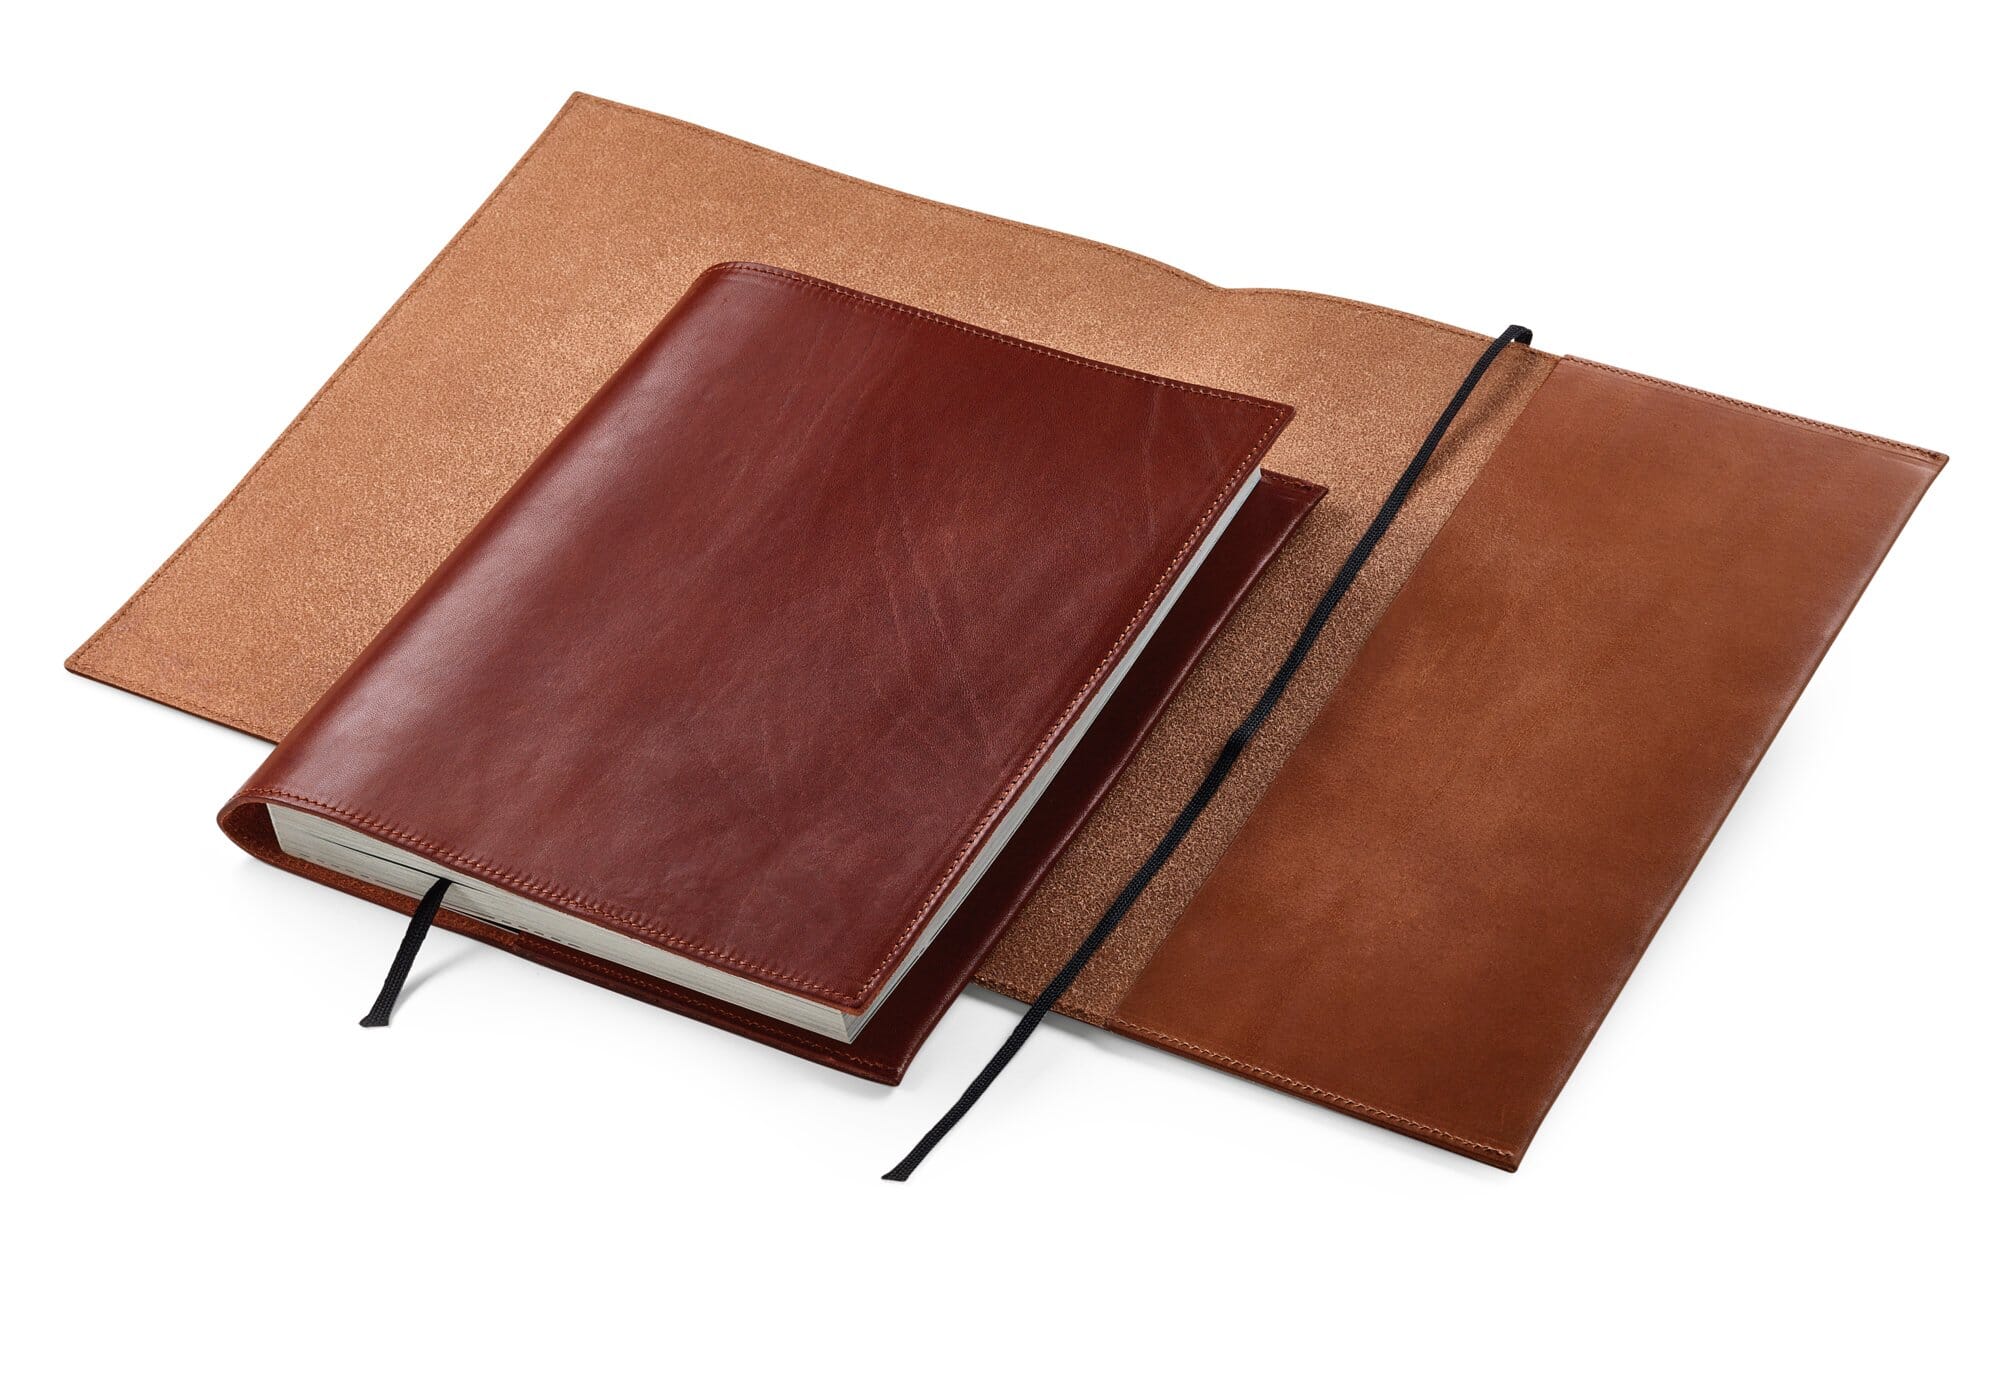 Leather Book Cover Jackets, Hand Stitched